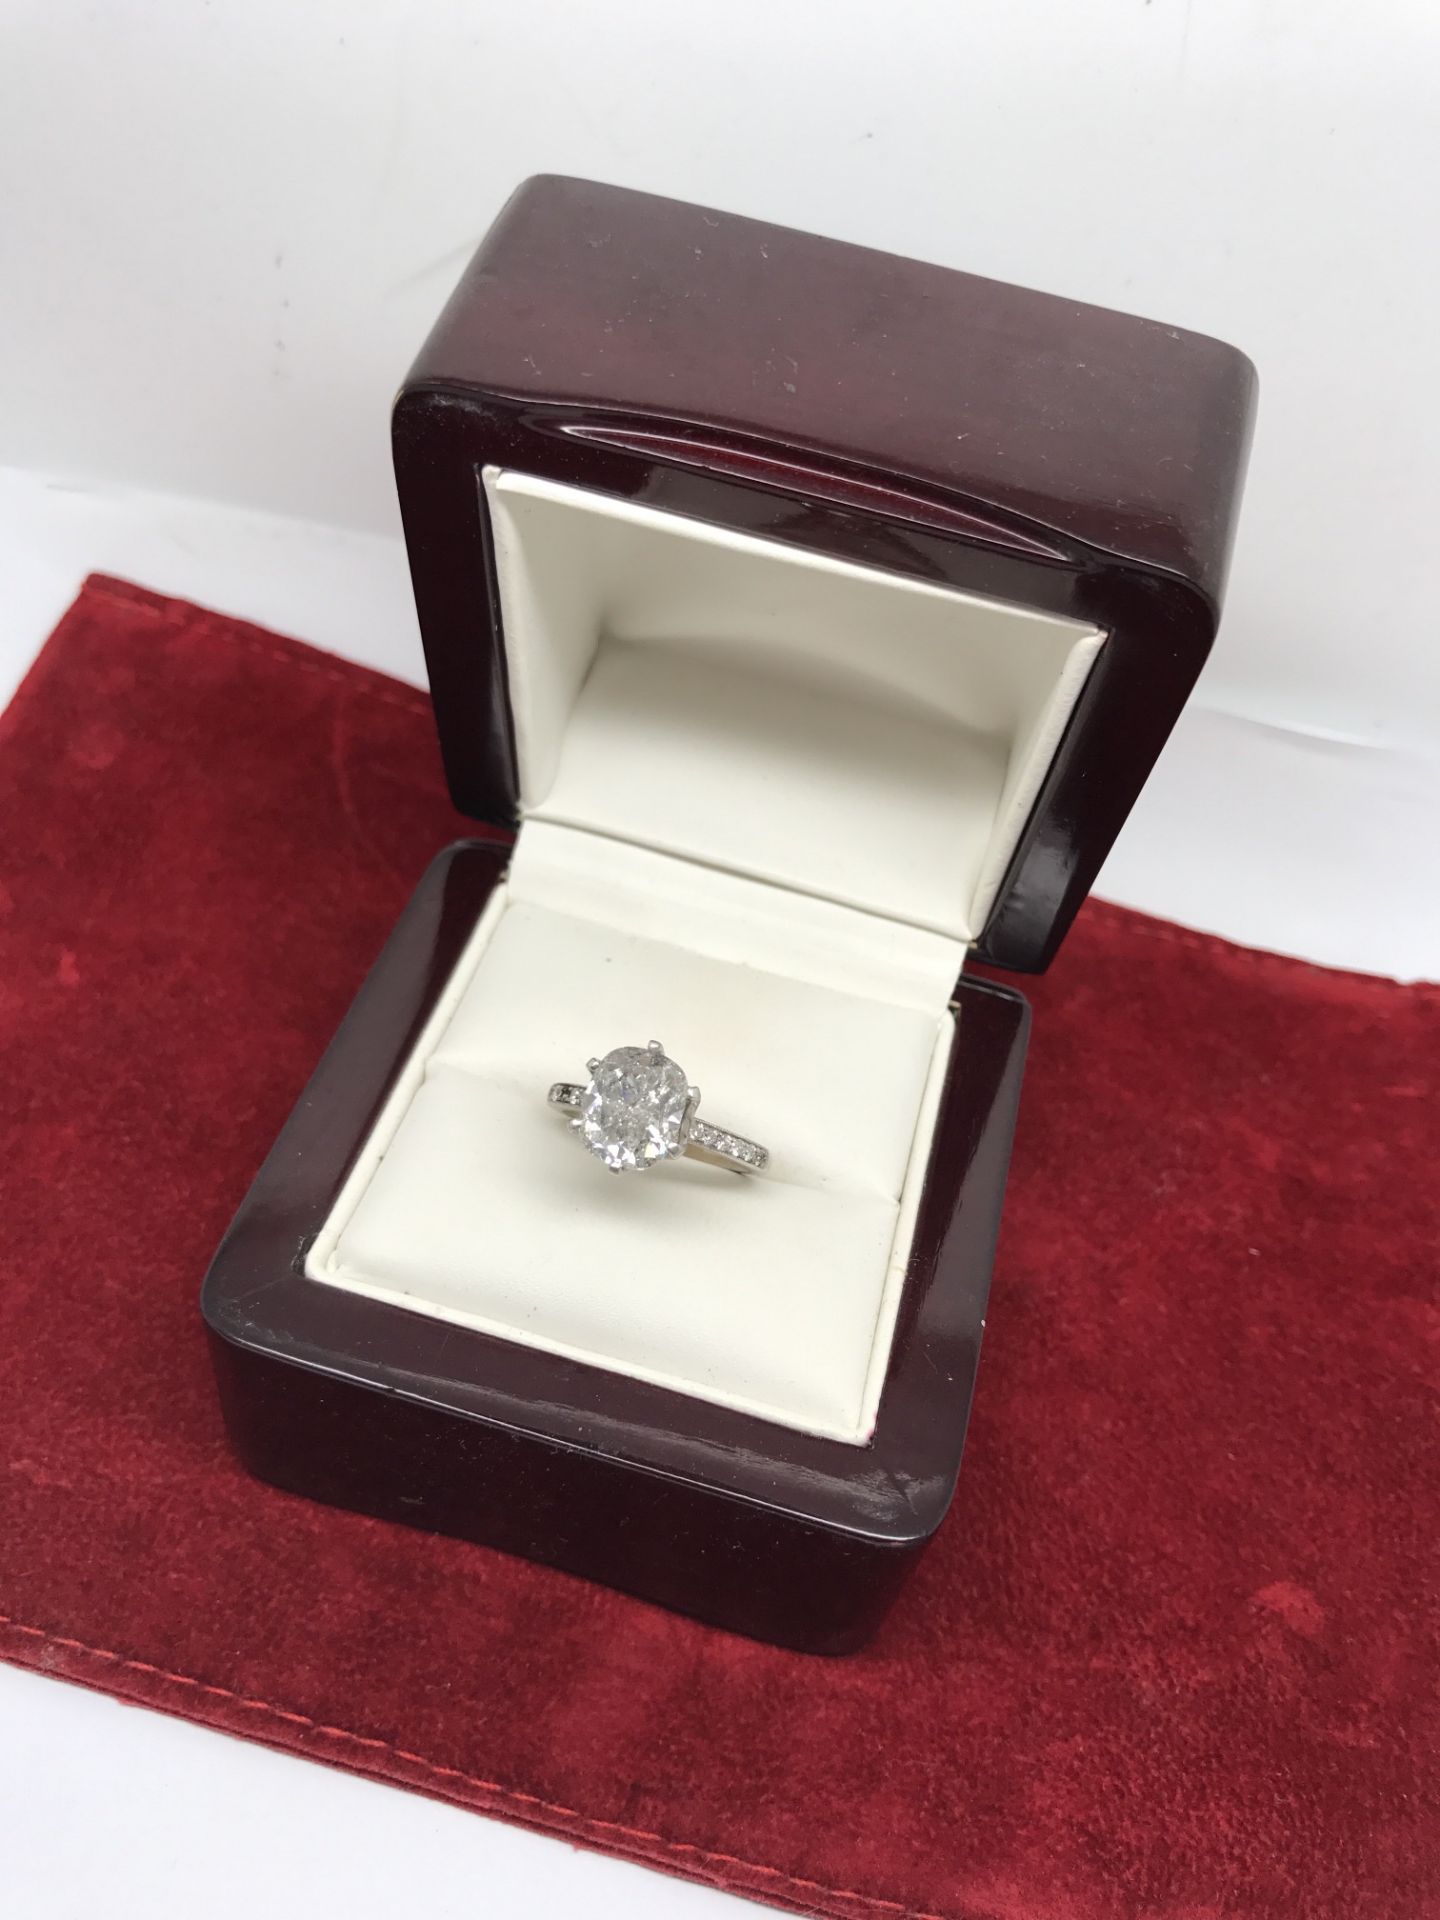 APPROX 3.75ct DIAMOND SOLITAIRE RING SET IN WHITE GOLD - Image 4 of 4